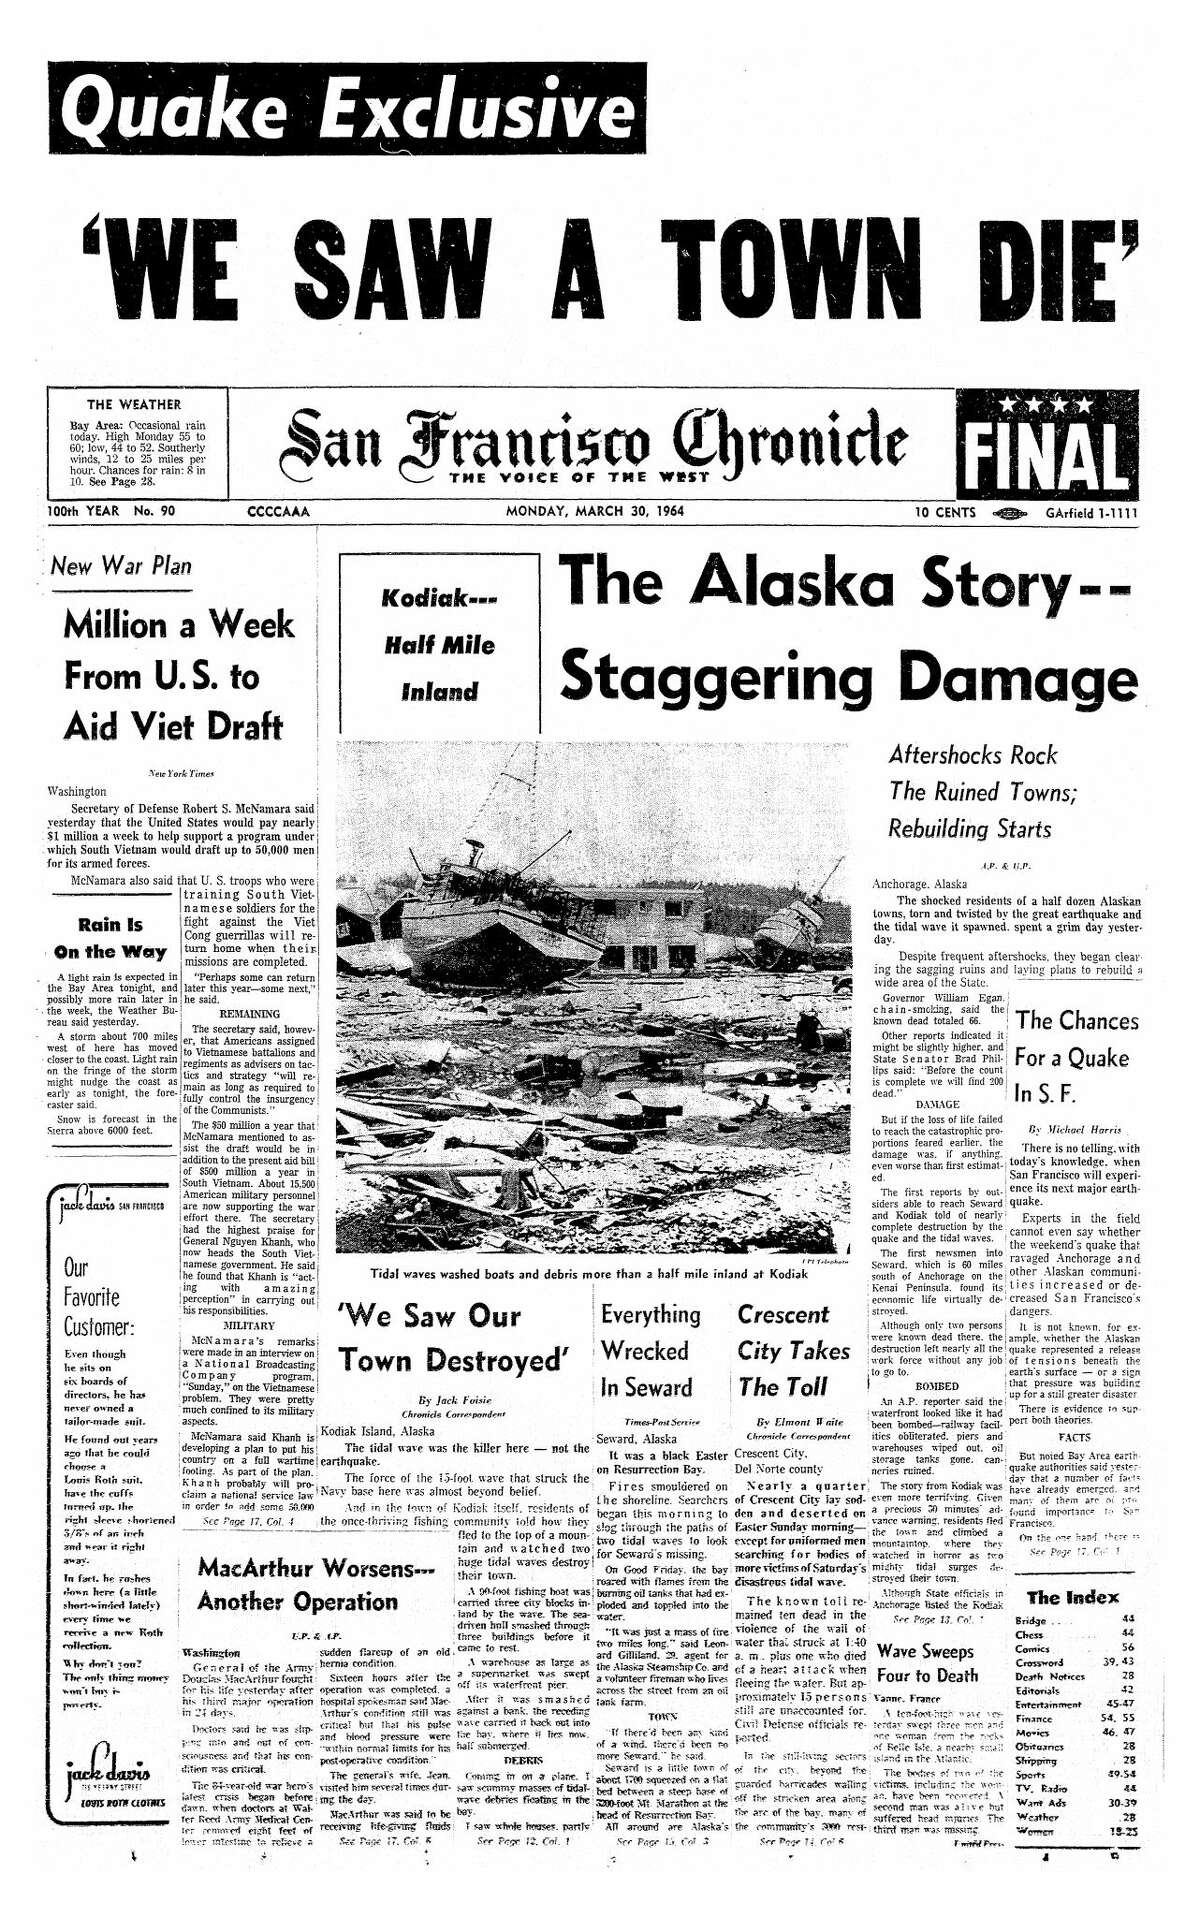 The San Francisco Chronicle reports on the 1964 tsunami that caused severe damage in Crescent City, Calif. It was triggered by a 9.2 earthquake in Alaska.